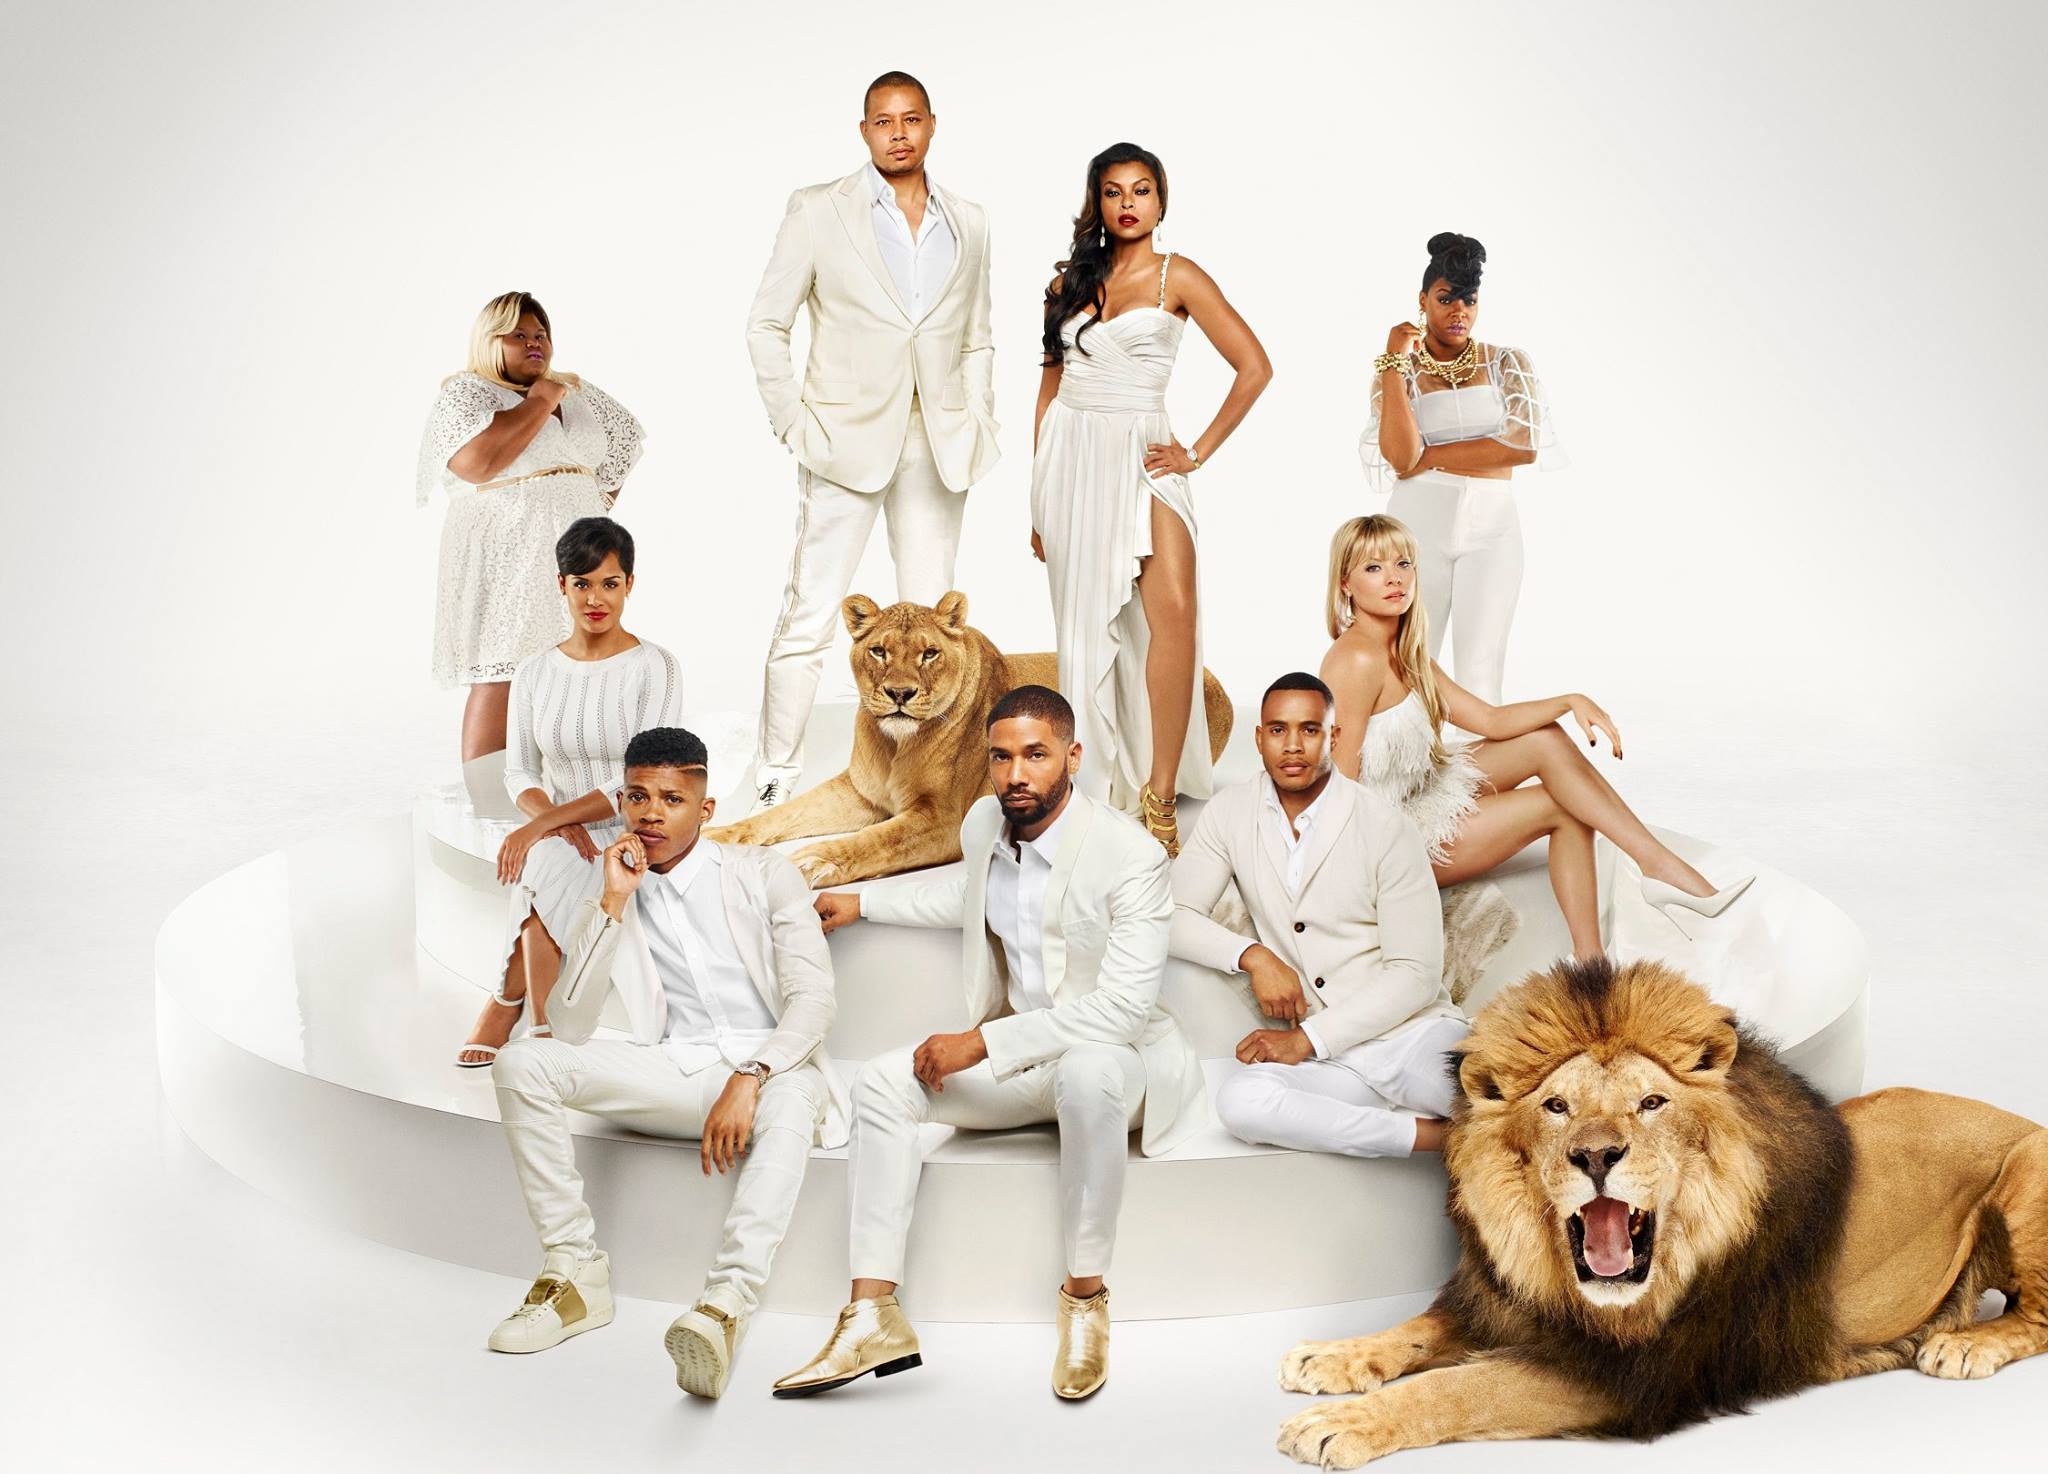 'Empire' Strikes: How Cookie, Lucious and the Lyon Family Ruled in 2015
